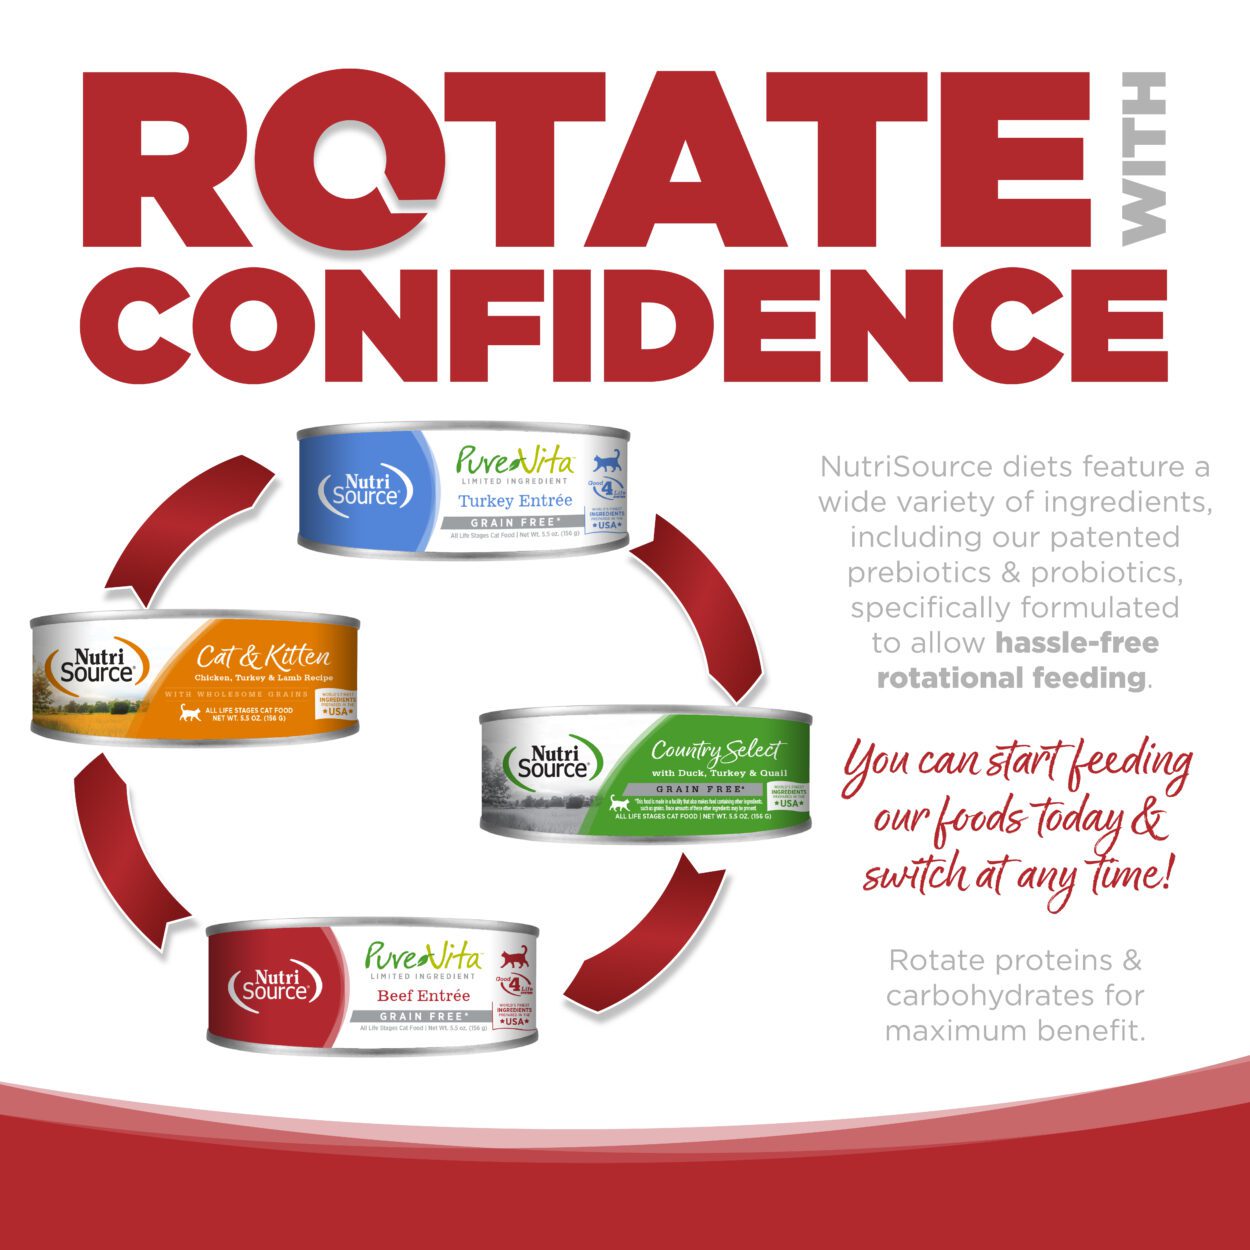 ROTATE WITH CONFIDENCE